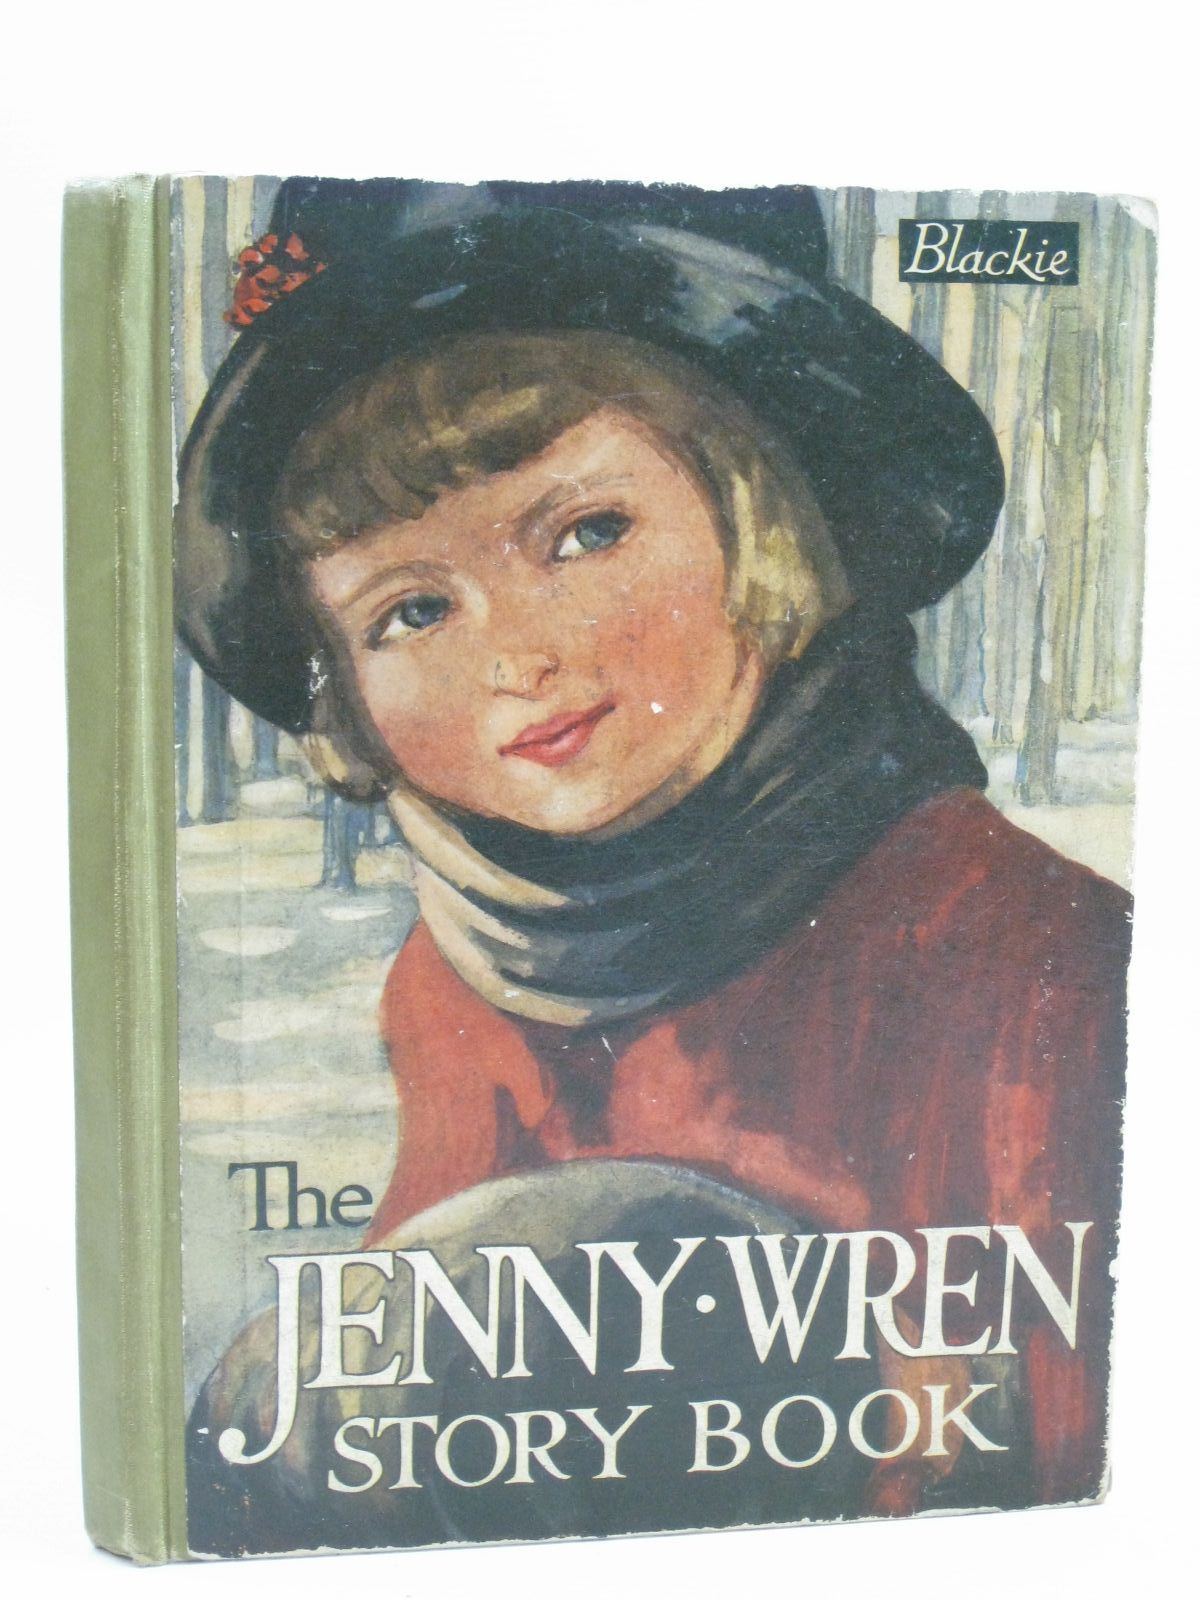 Photo of THE JENNY WREN STORY BOOK illustrated by Attwell, Mabel Lucie
Brock, H.M.
et al.,  published by Blackie & Son Ltd. (STOCK CODE: 1405196)  for sale by Stella & Rose's Books